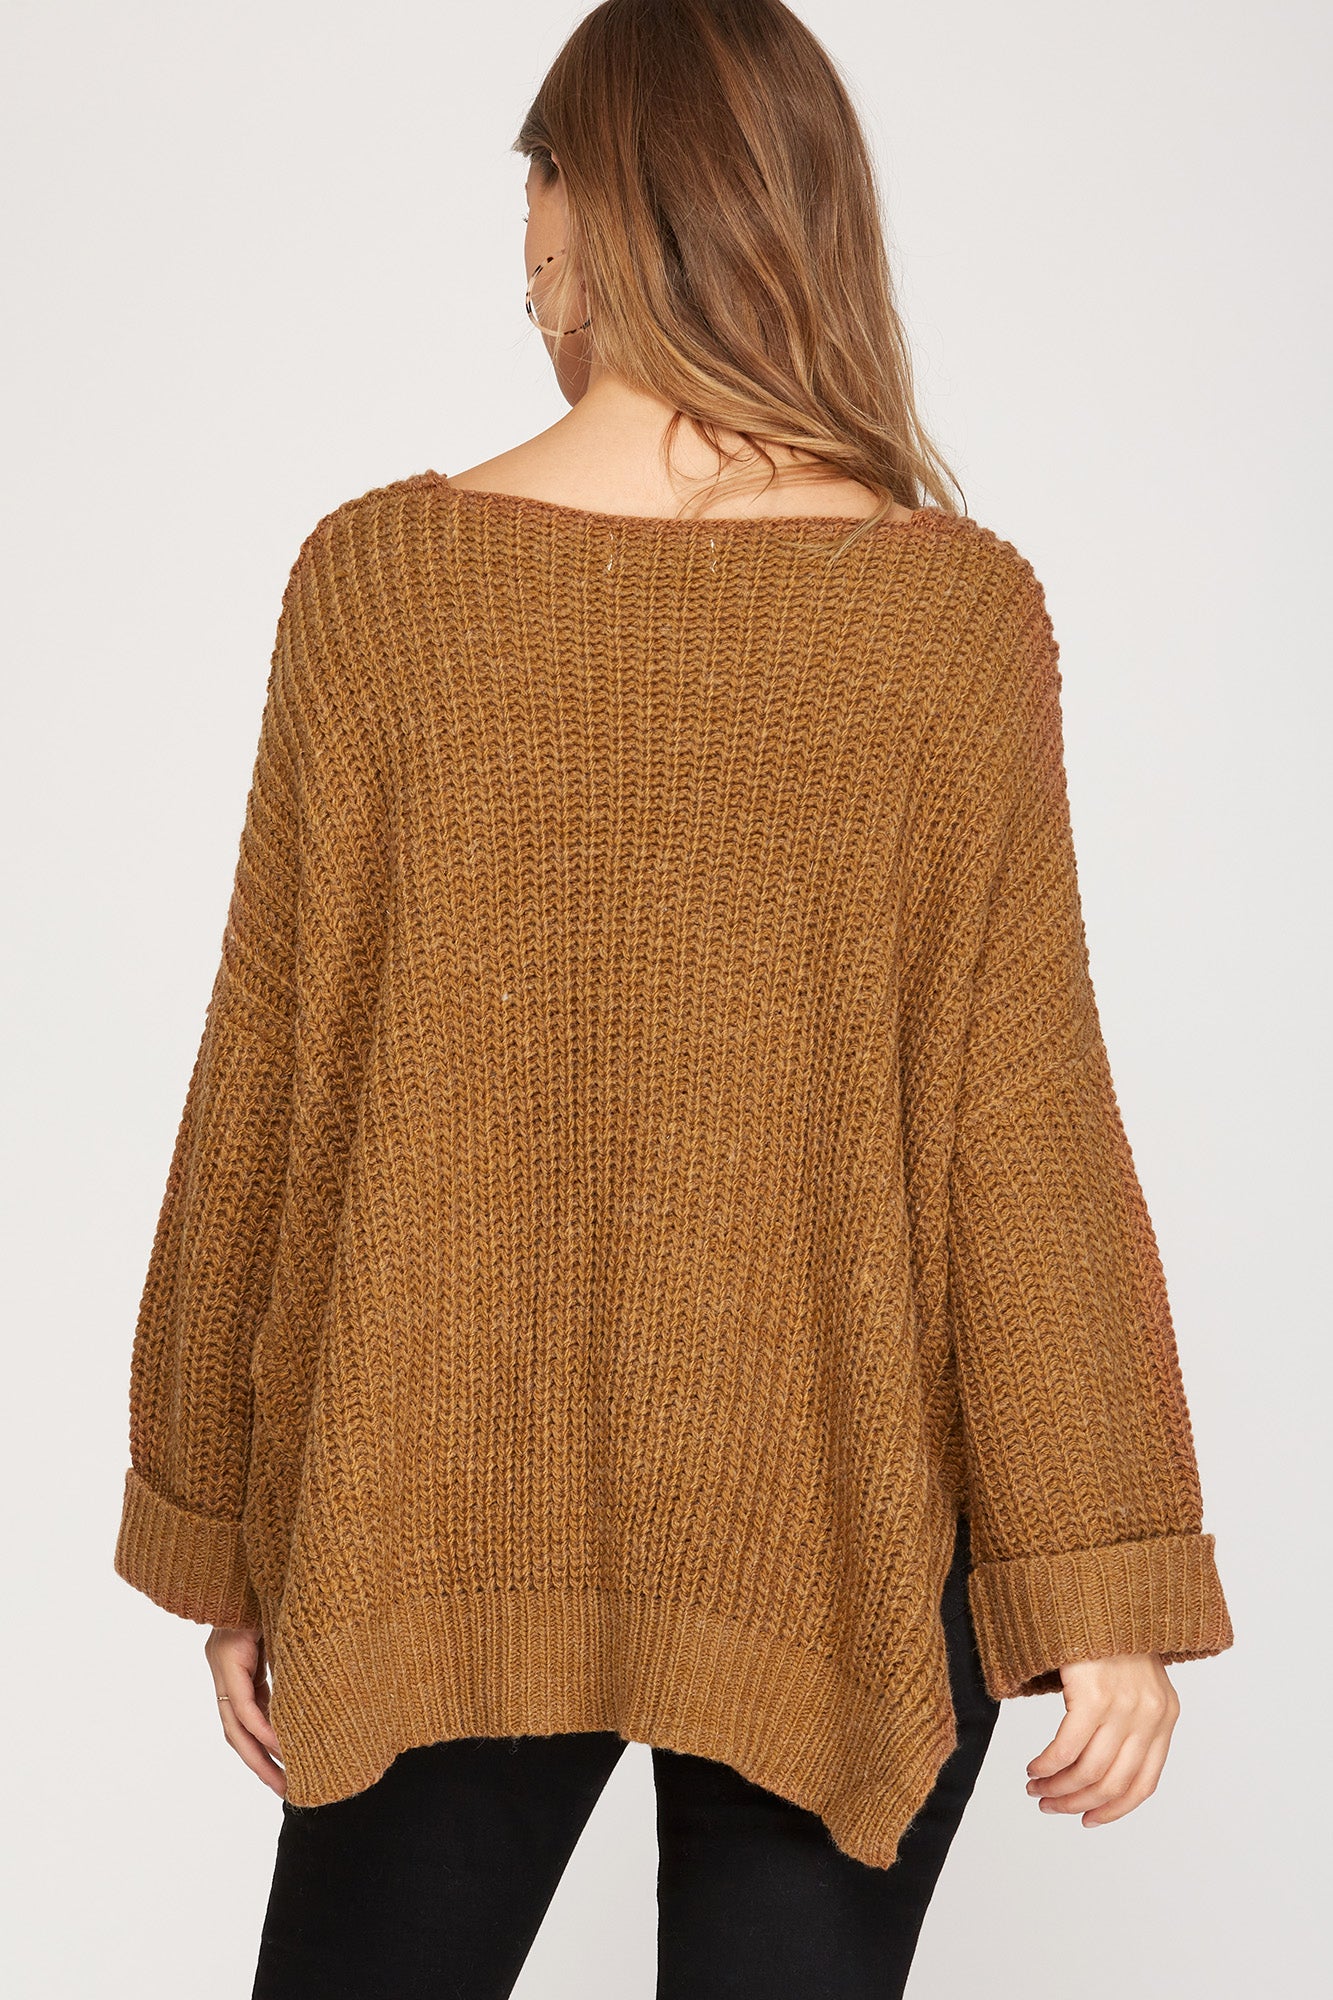 Cuff Sleeve, Hi Low Knit Sweater - Camel-Sweater- Hometown Style HTS, women's in store and online boutique located in Ingersoll, Ontario